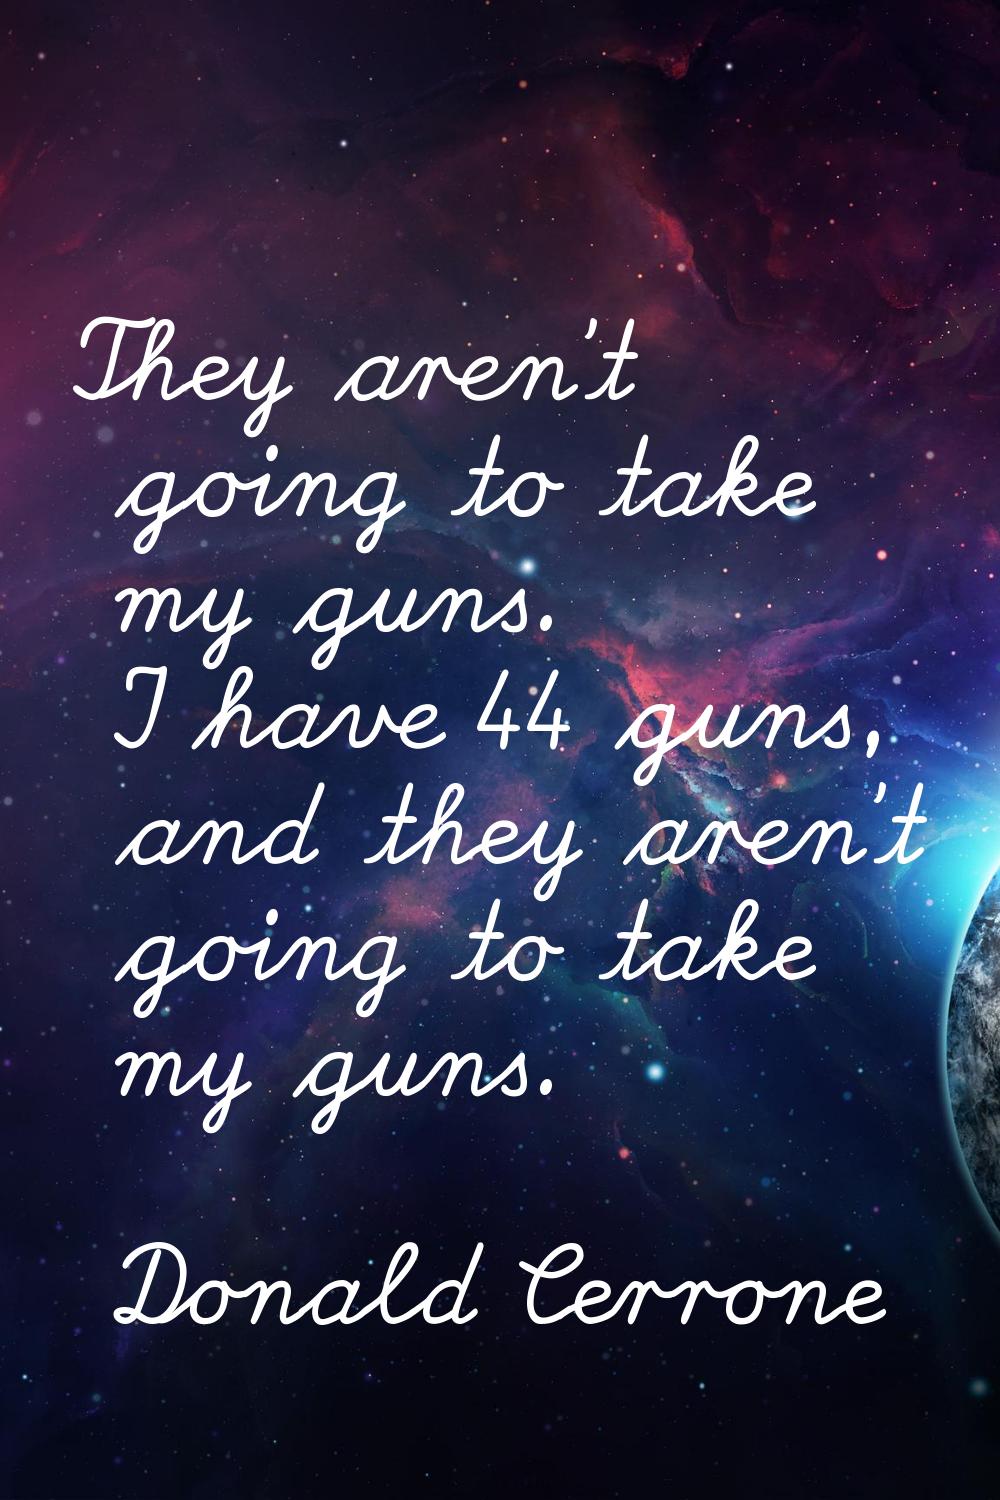 They aren't going to take my guns. I have 44 guns, and they aren't going to take my guns.